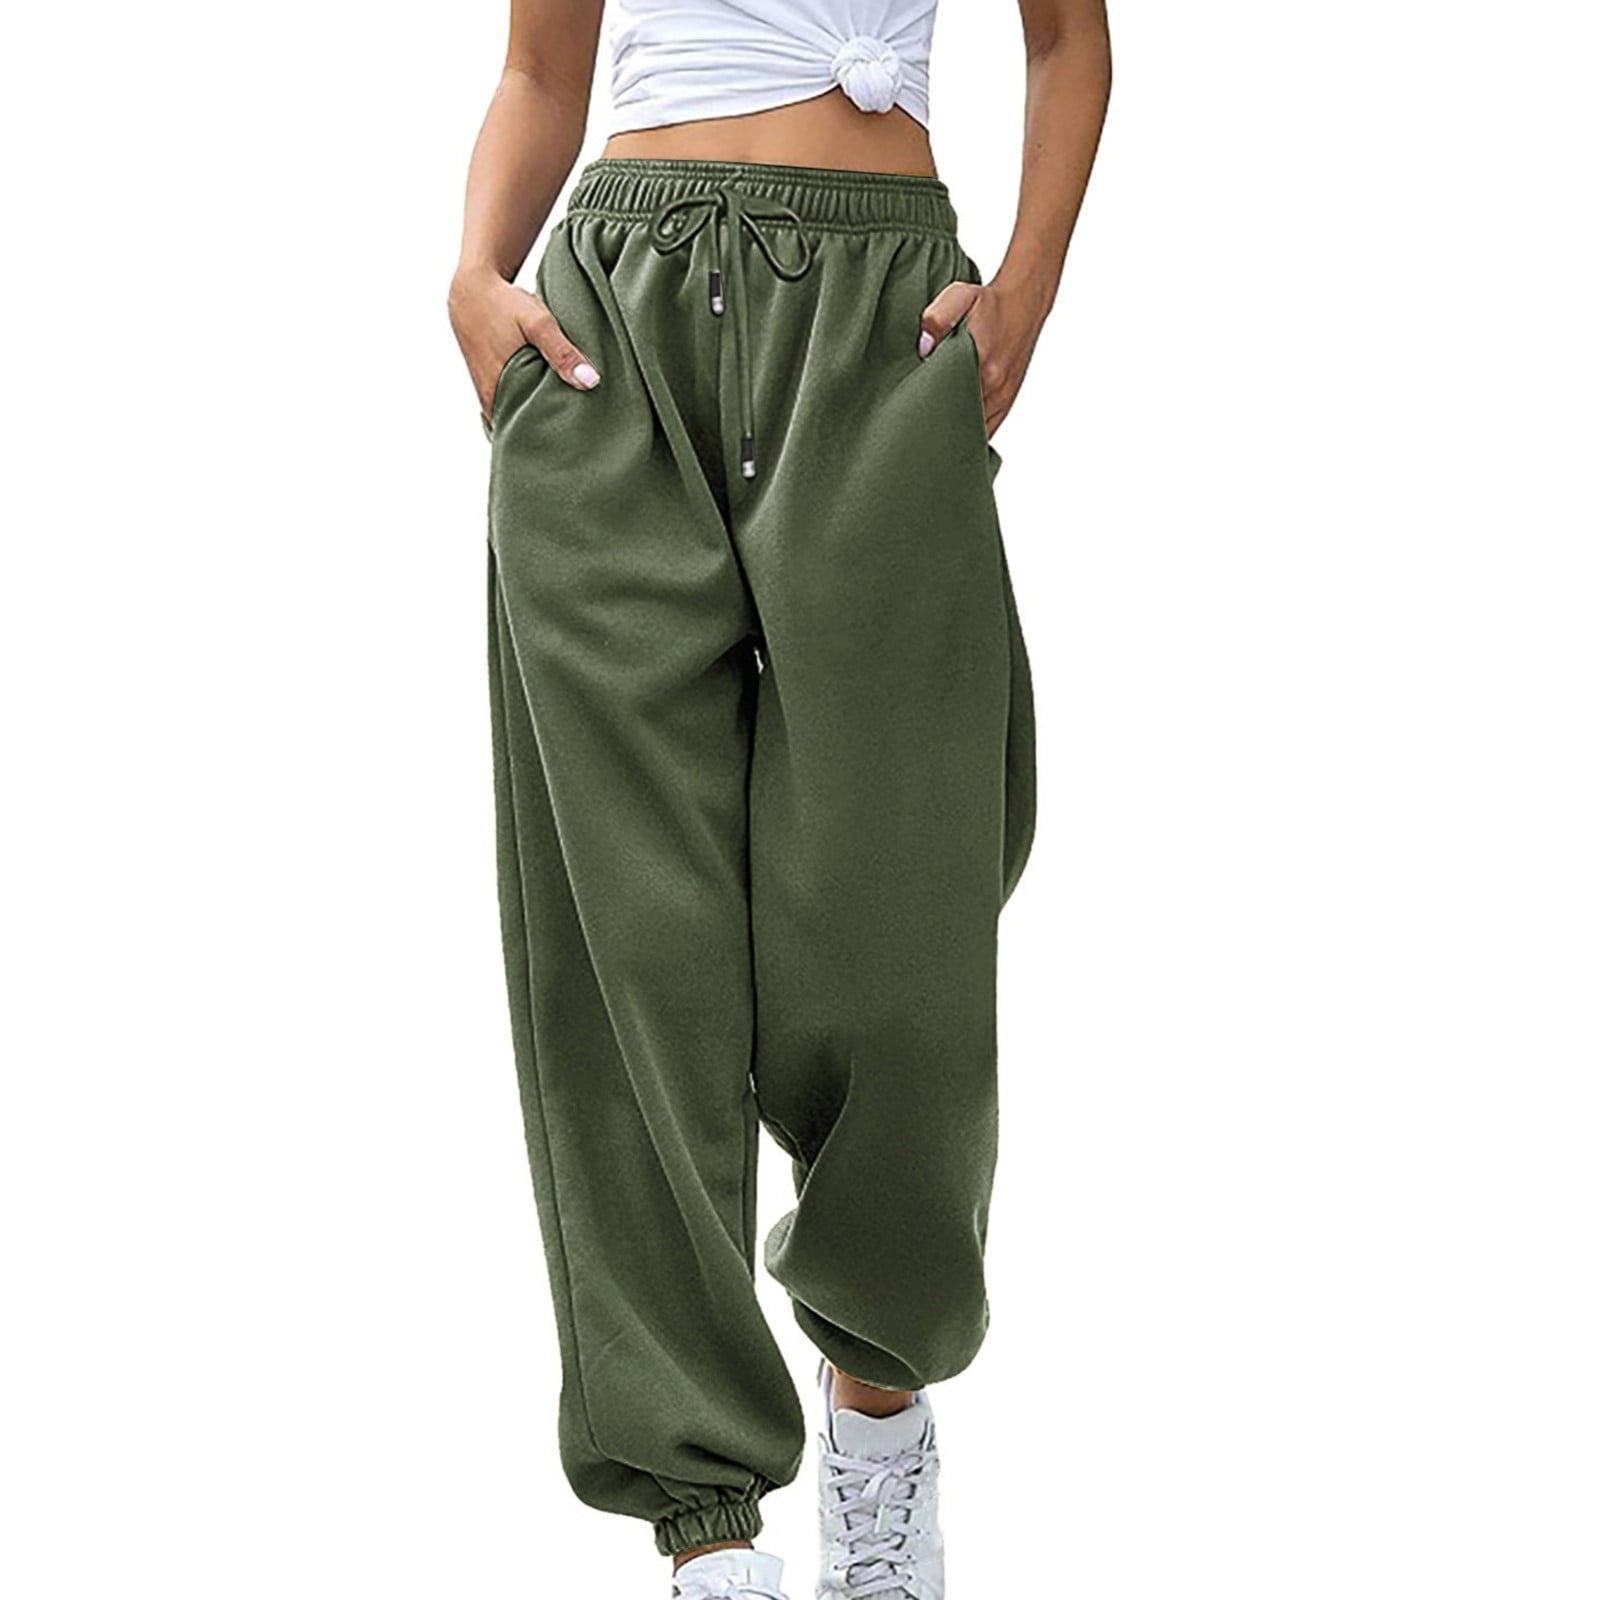 Ernkv Women's Capri Cargo Pants with Pocket Summer Clearance Clothing High  Elastic Waist Solid Fashion Relaxed Drawstring Leisure Comfy Trousers